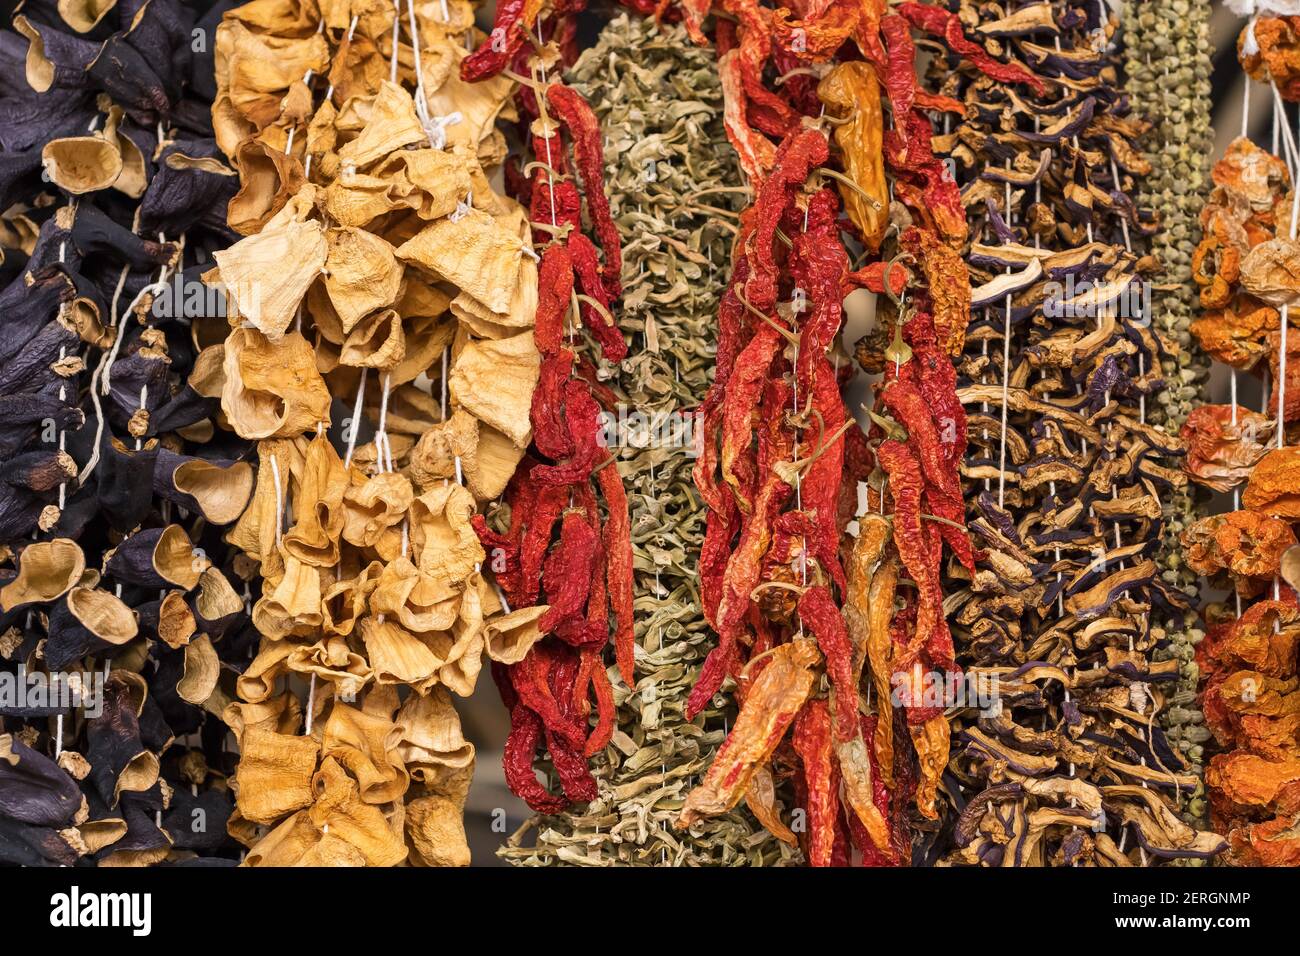 Variety of dried vegetables on farmers market in Turkey Stock Photo